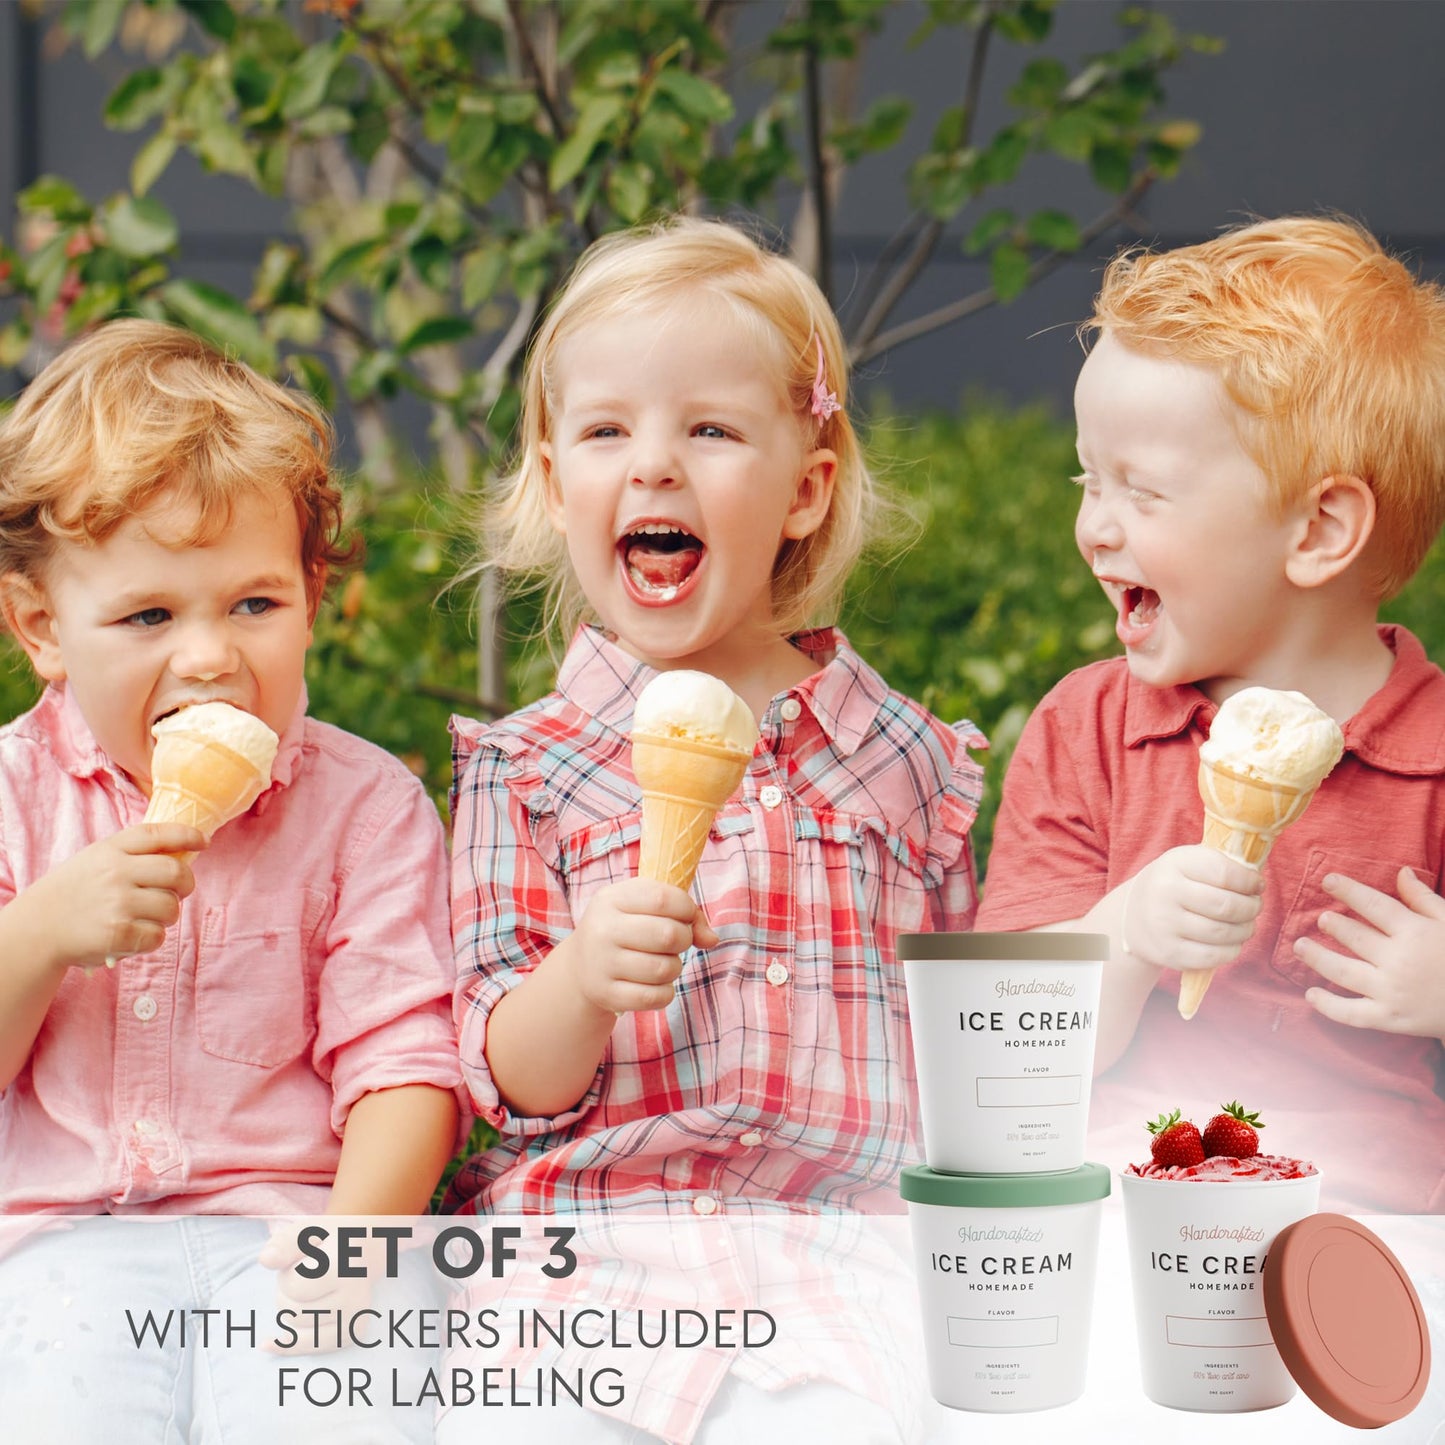 ZICOTO Set of 3 Reusable Ice Cream Containers 1 Quarts ea. - Perfect for Homemade Sorbet, Frozen Yogurt Or Gelato - Stackable Storage Pint Containers, Stickers And Lids Stores Easily In Freezer